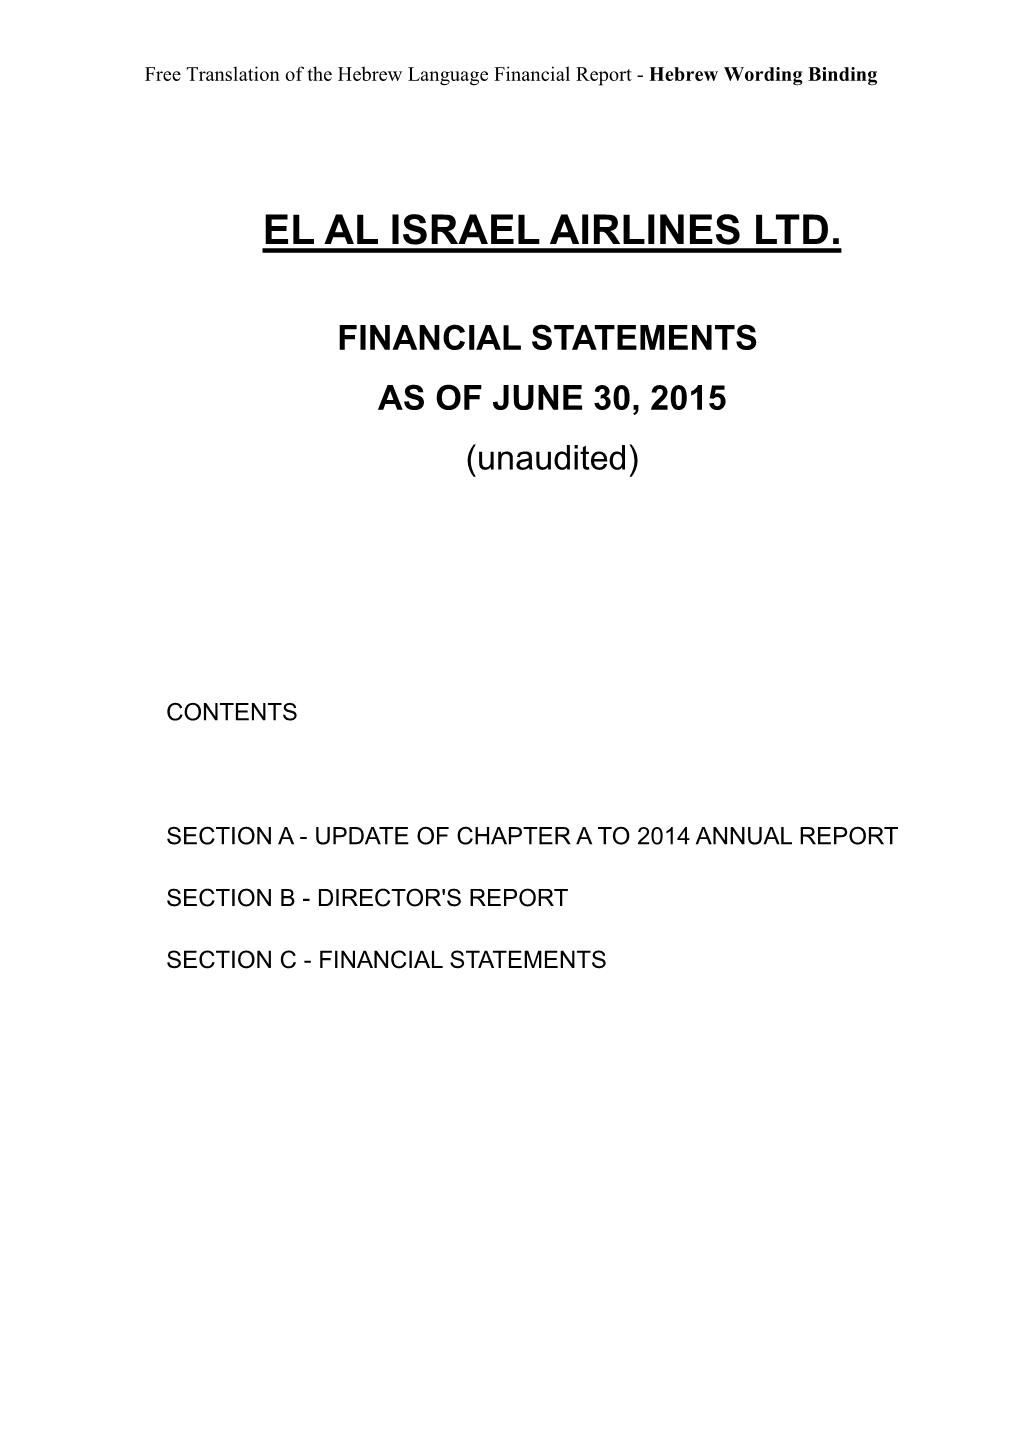 El Al Israel Airlines Is the Israeli Designated Carrier on Most Routes to and from Israel